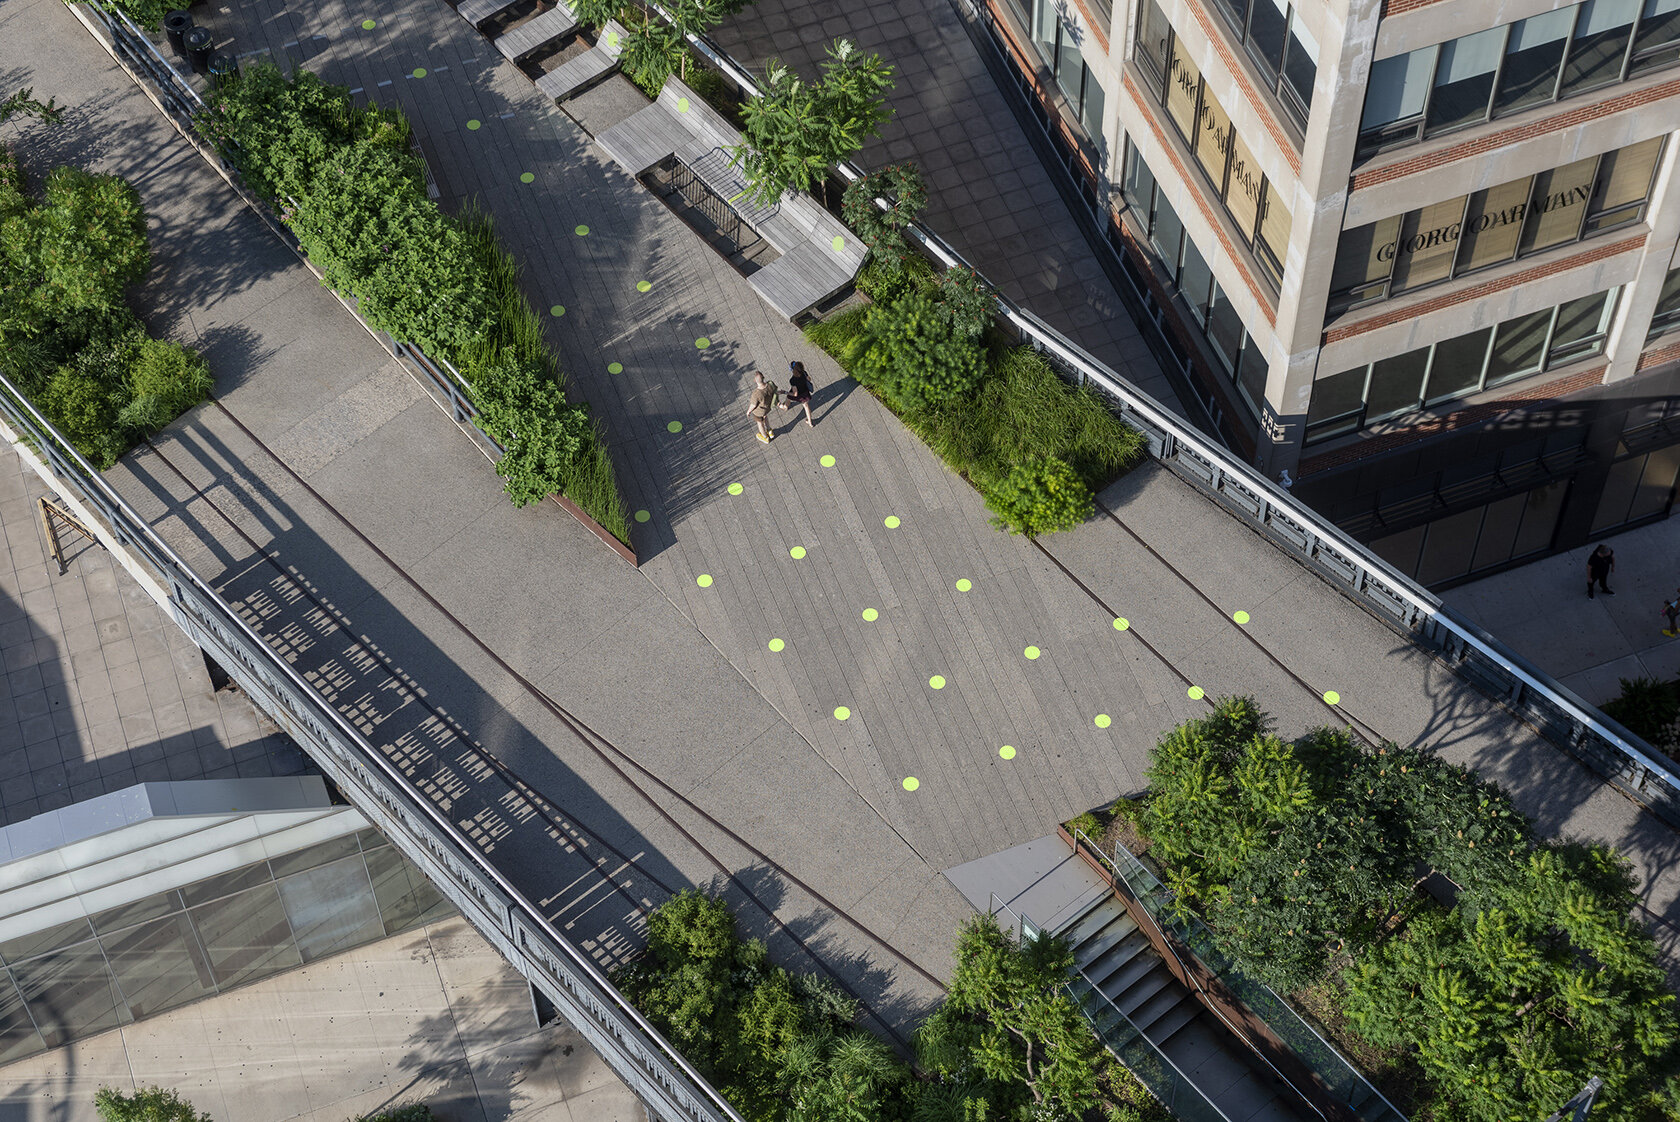 Social Distancing Guidelines on The High Line